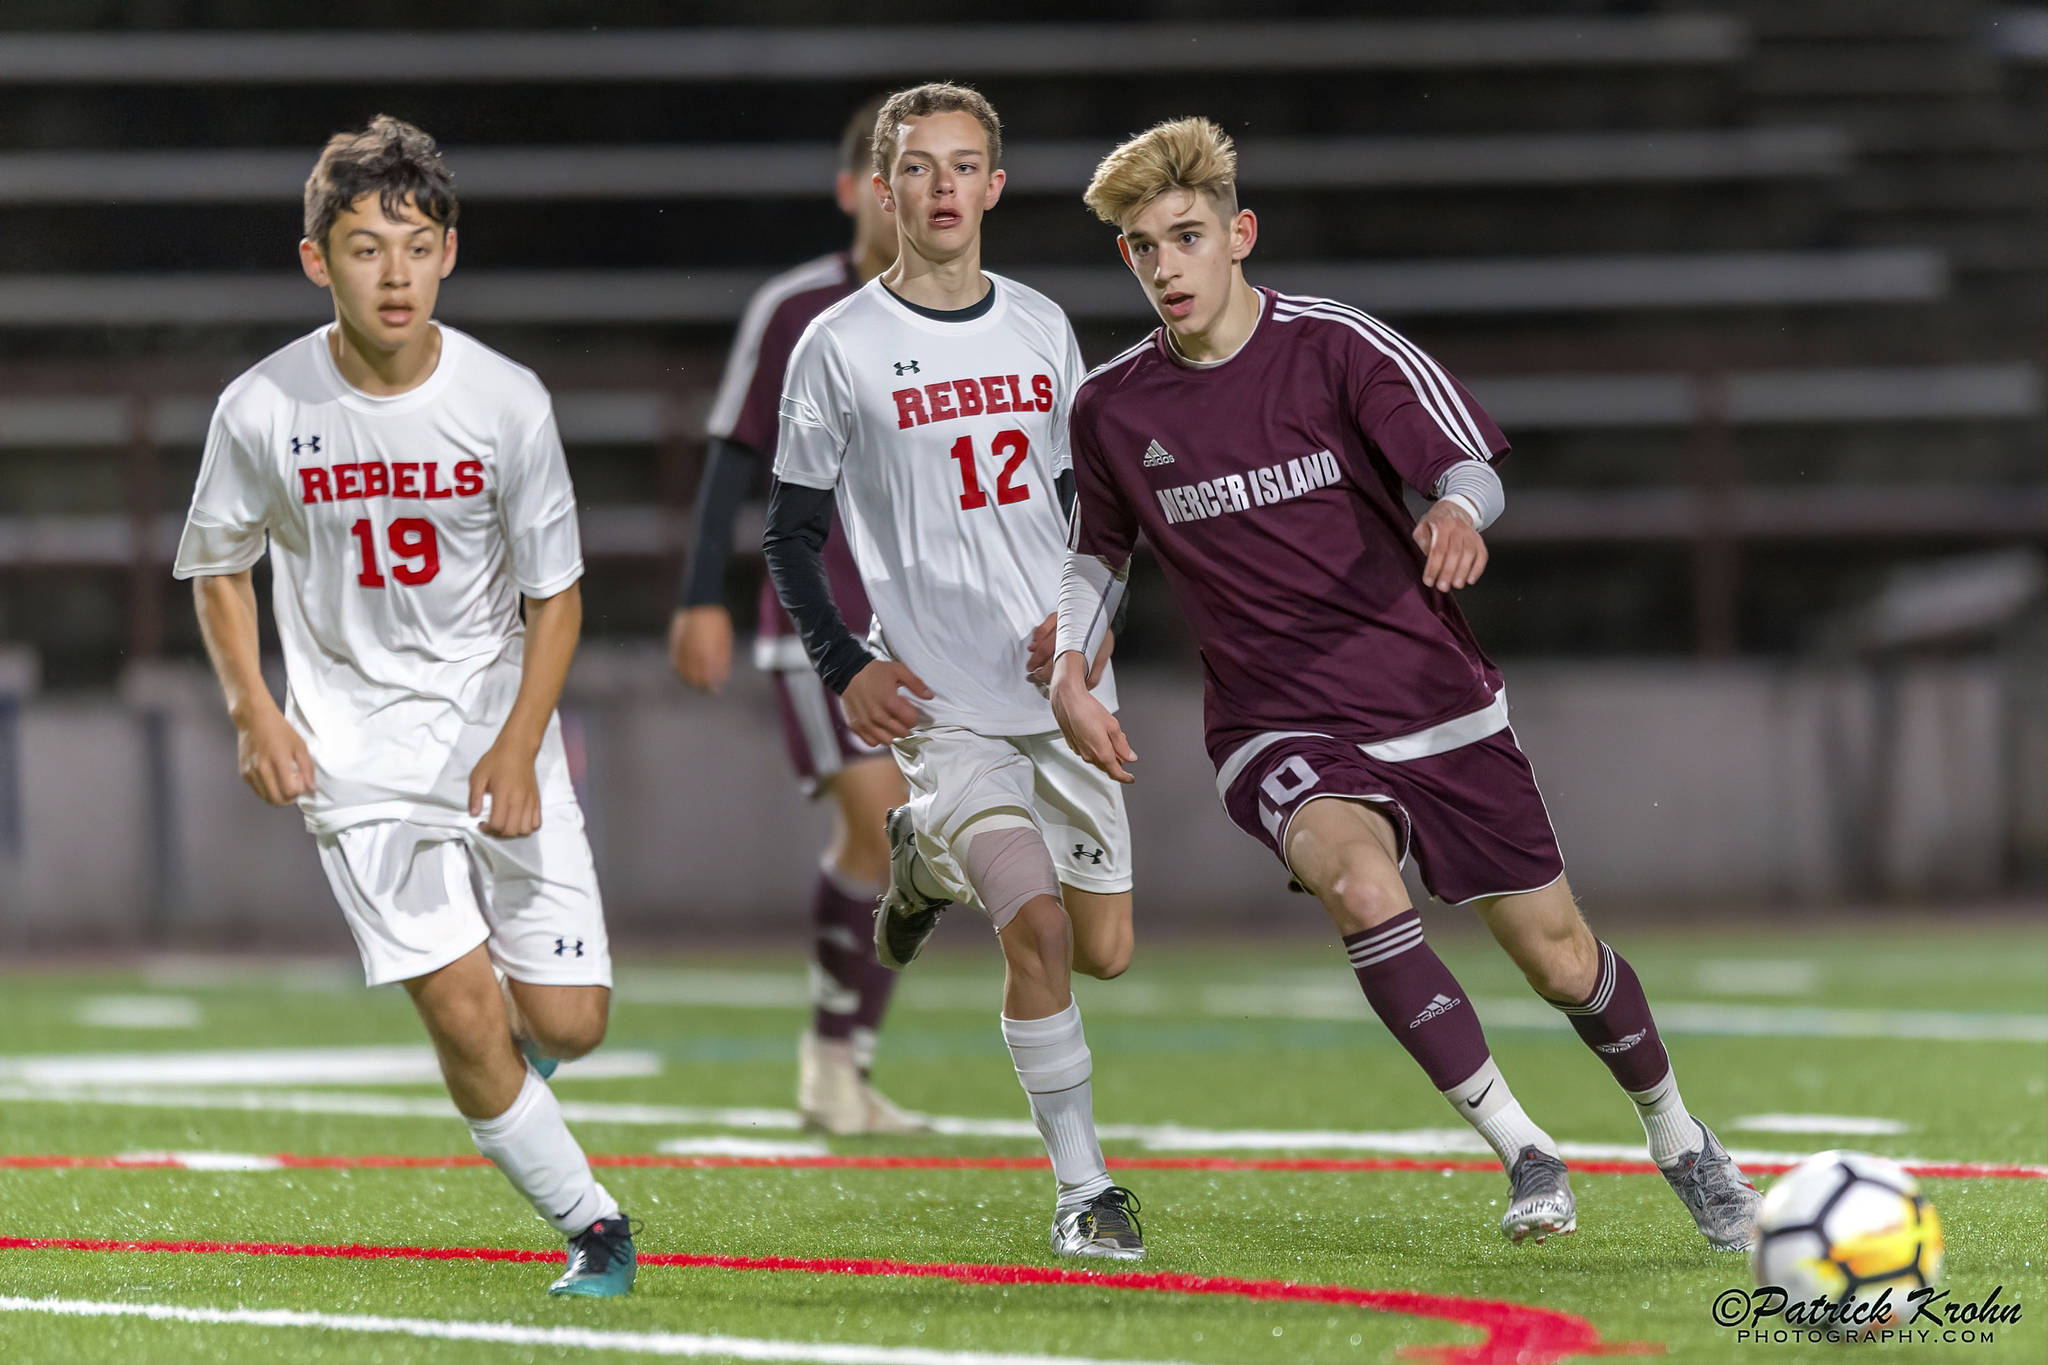 Mercer Island Islanders midfielder Matt Capone (right), passes the ball to a teammate in a contest against the Juanita Rebels during the 2019 season. Capone will play soccer at Northwest Nazarene University this fall. Photo courtesy of Patrick Krohn/Patrick Krohn Photography